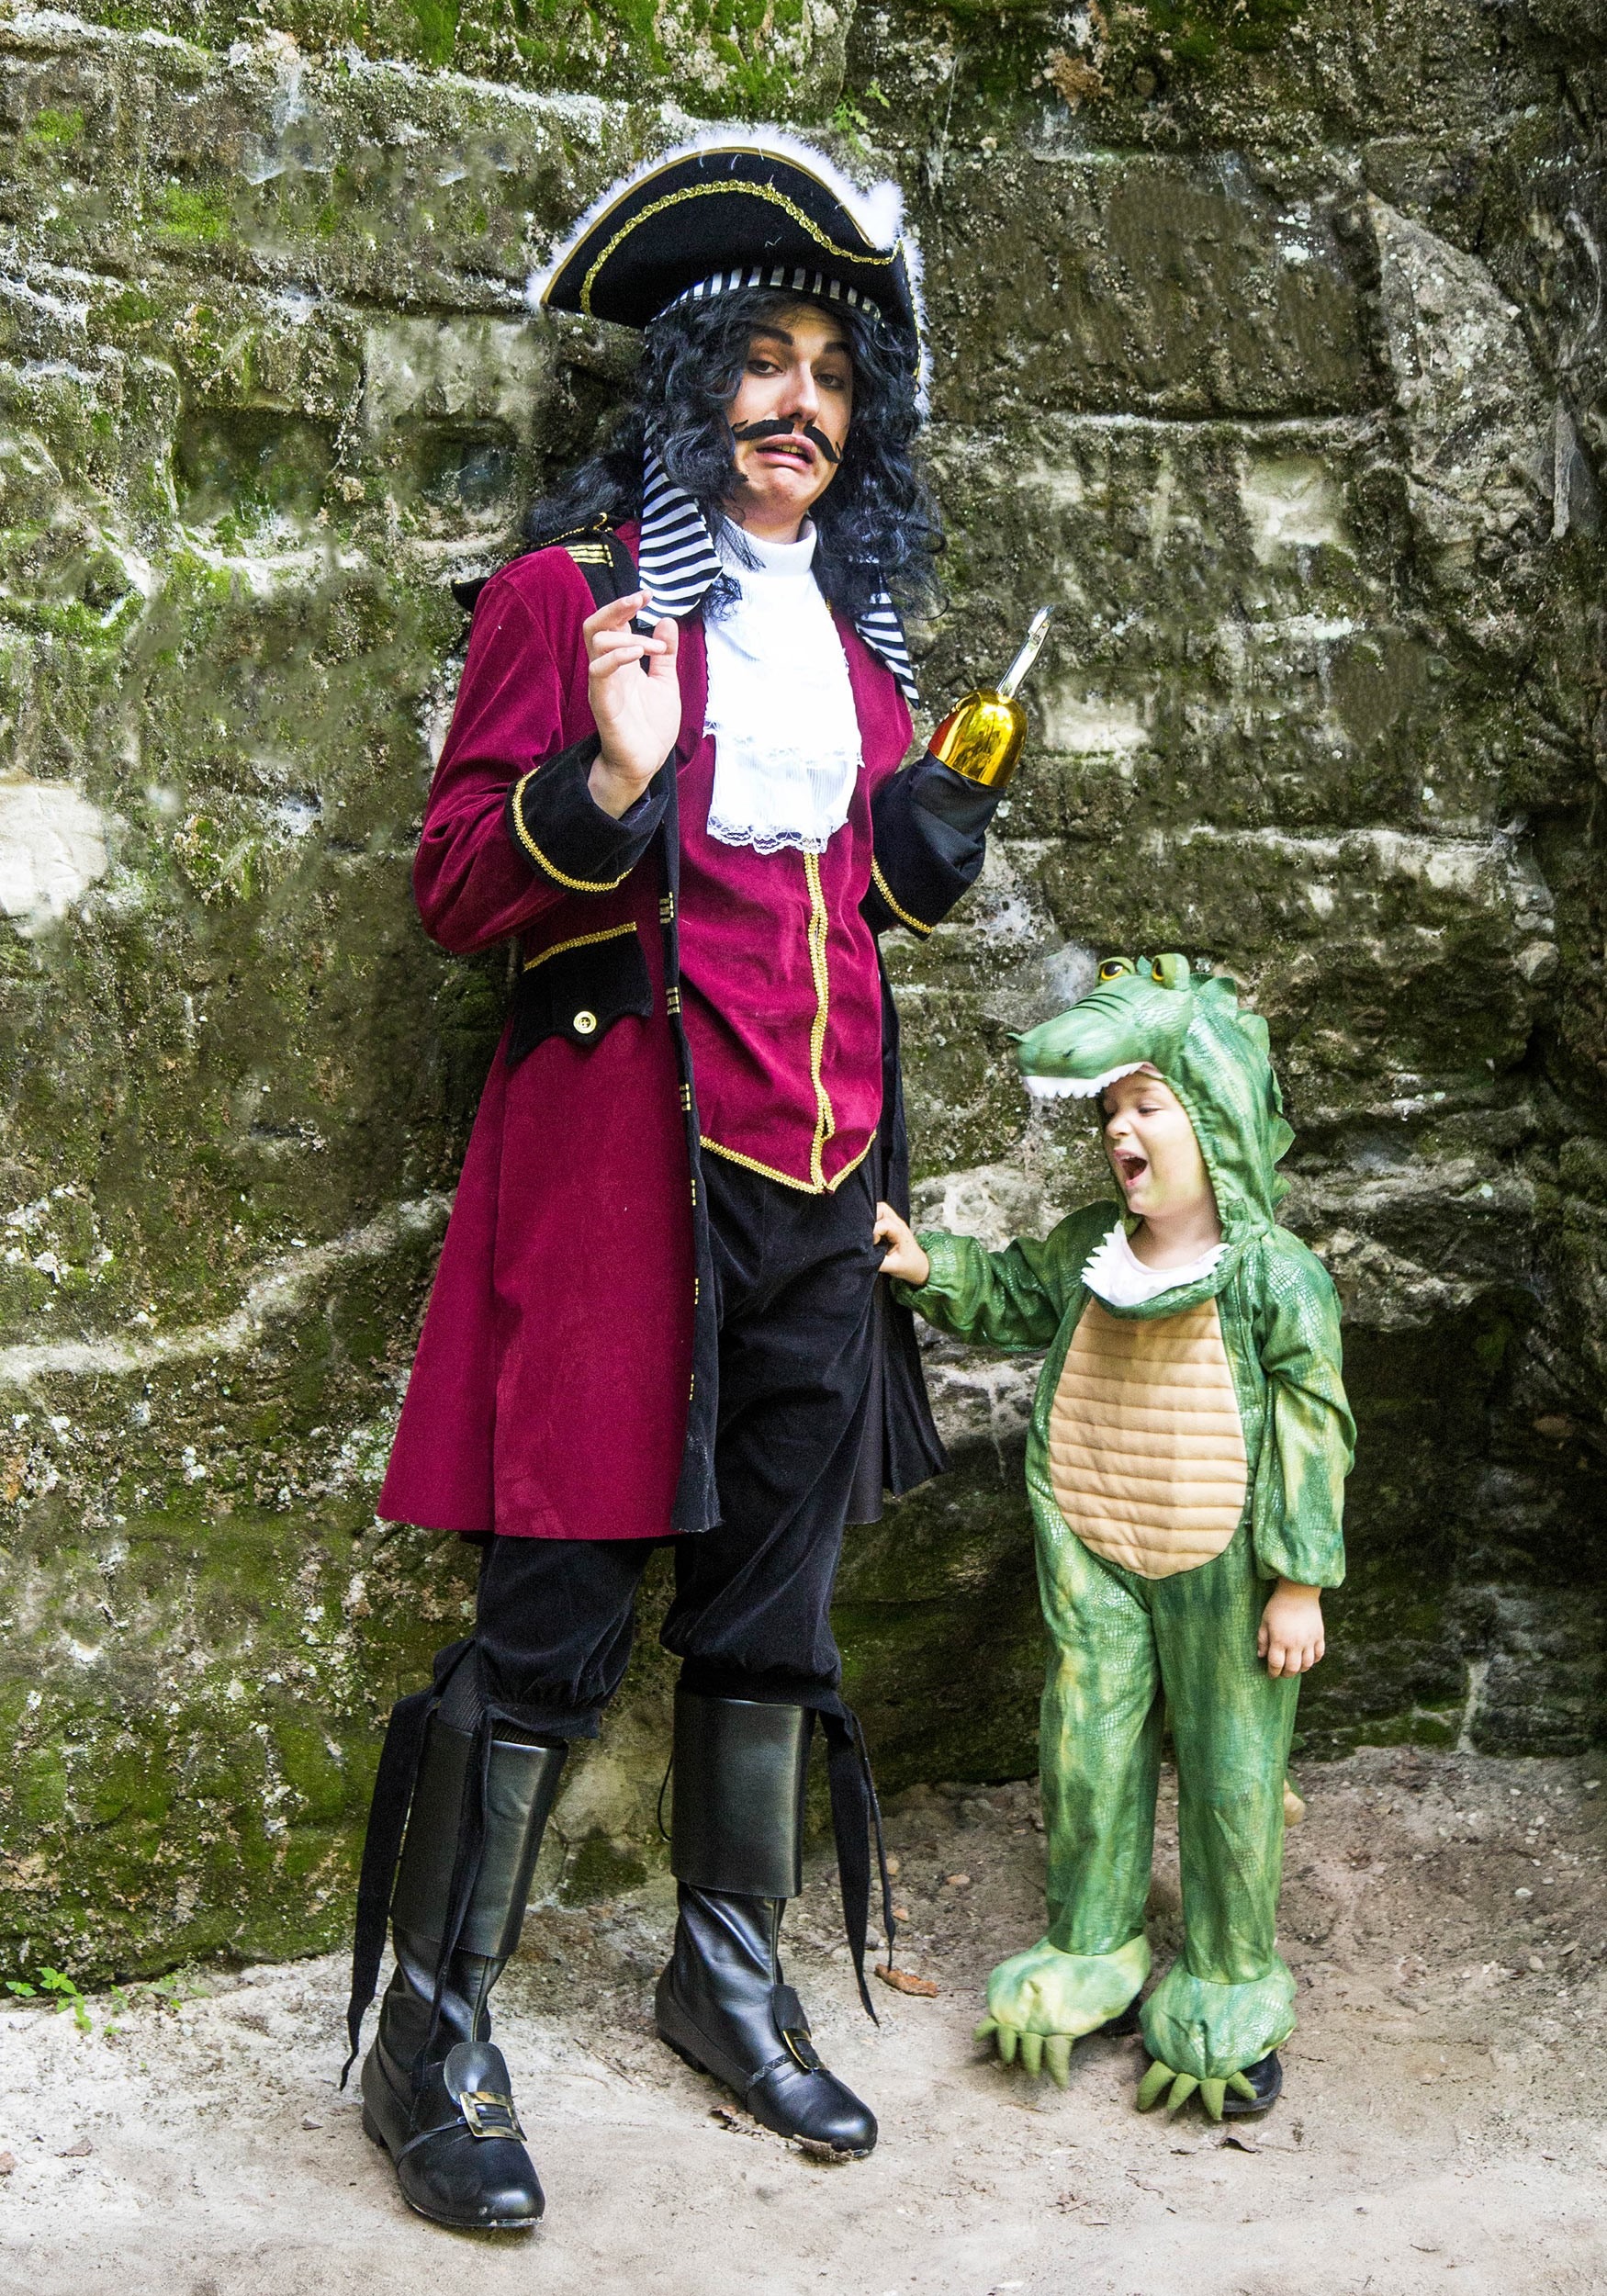 DIY Pirate Costume. Just bought a plain captain hook costume and